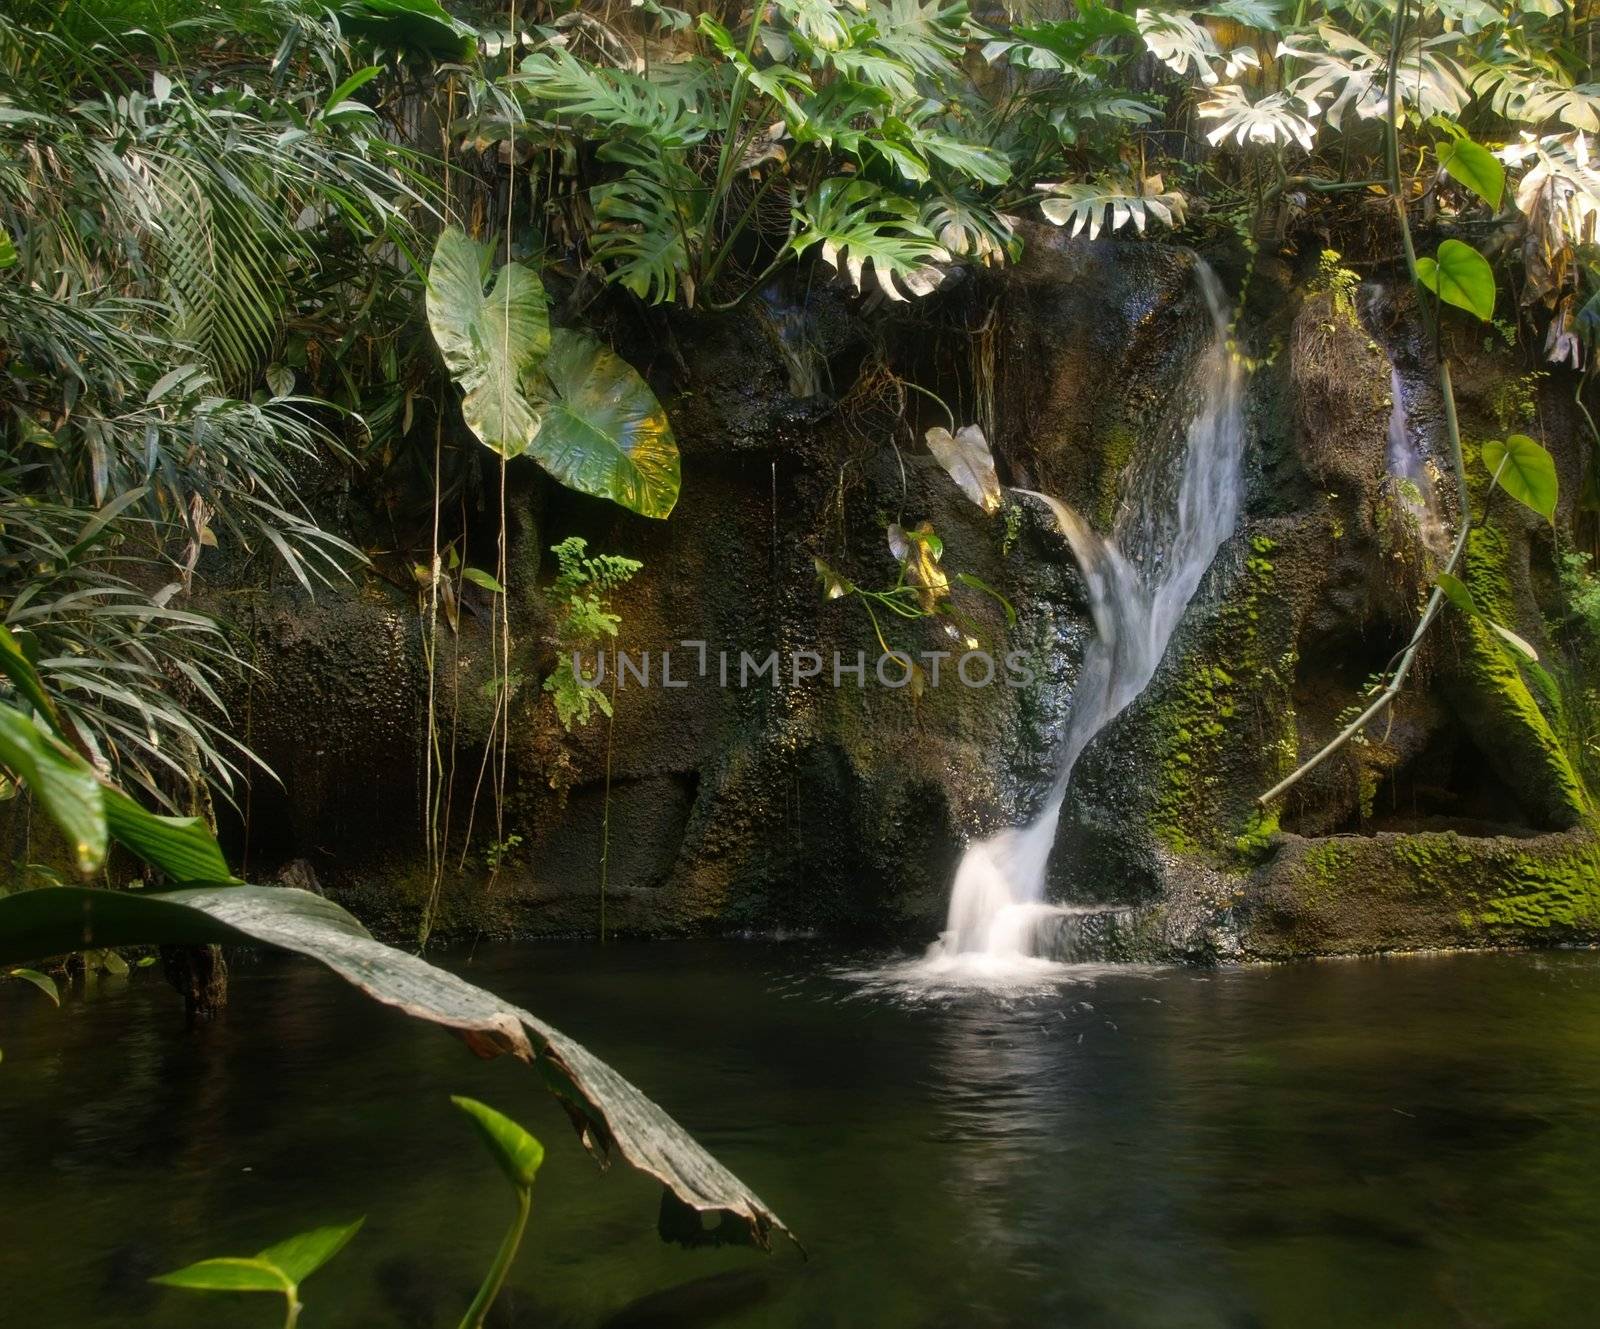 manmade rainforest and waterfall surrounded by tropical plants